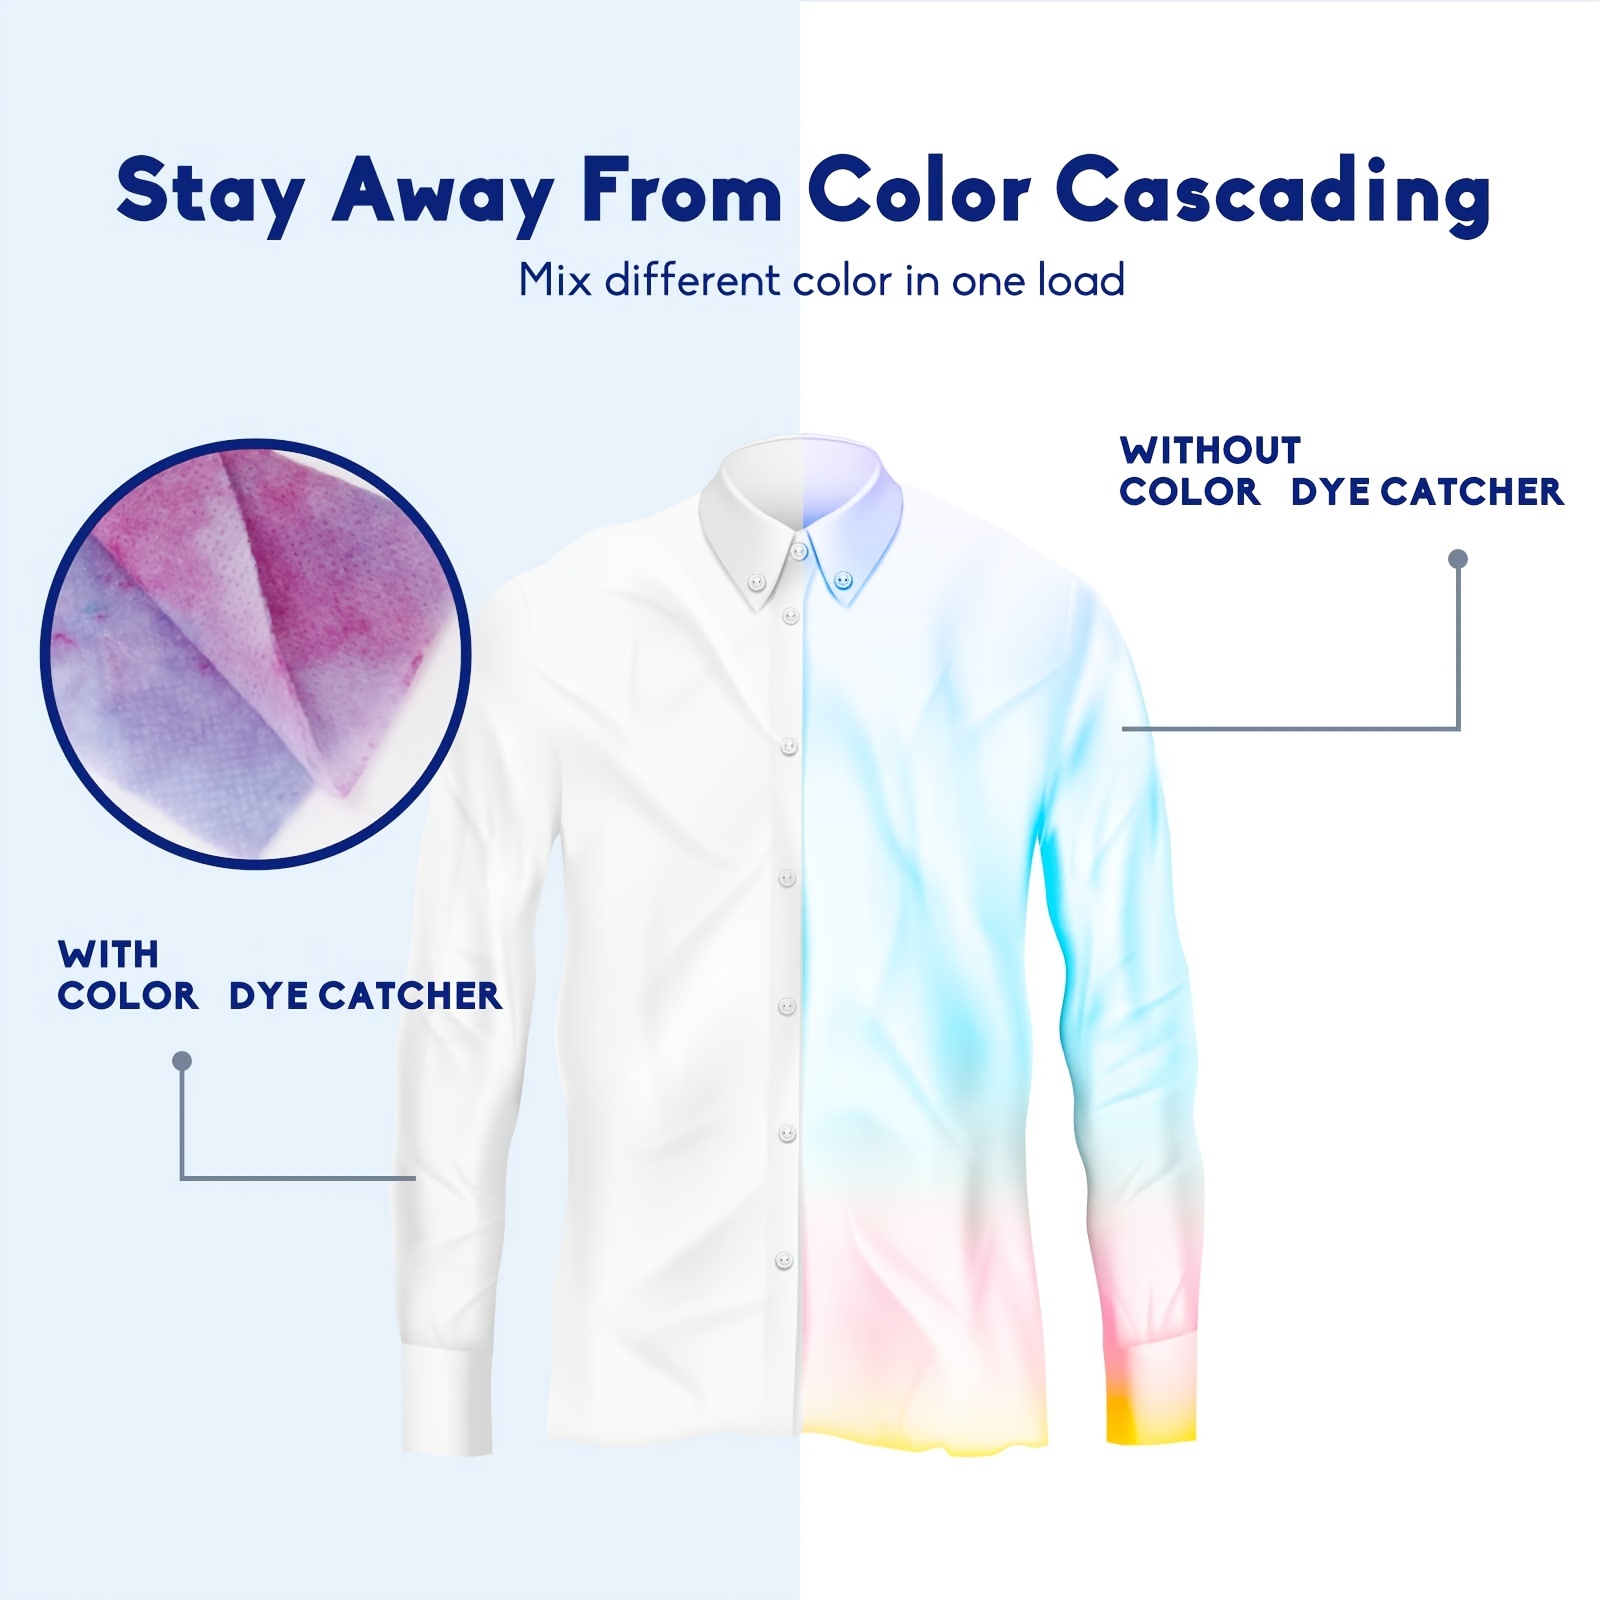 How Do Color Catcher Sheets Work In The Laundry?